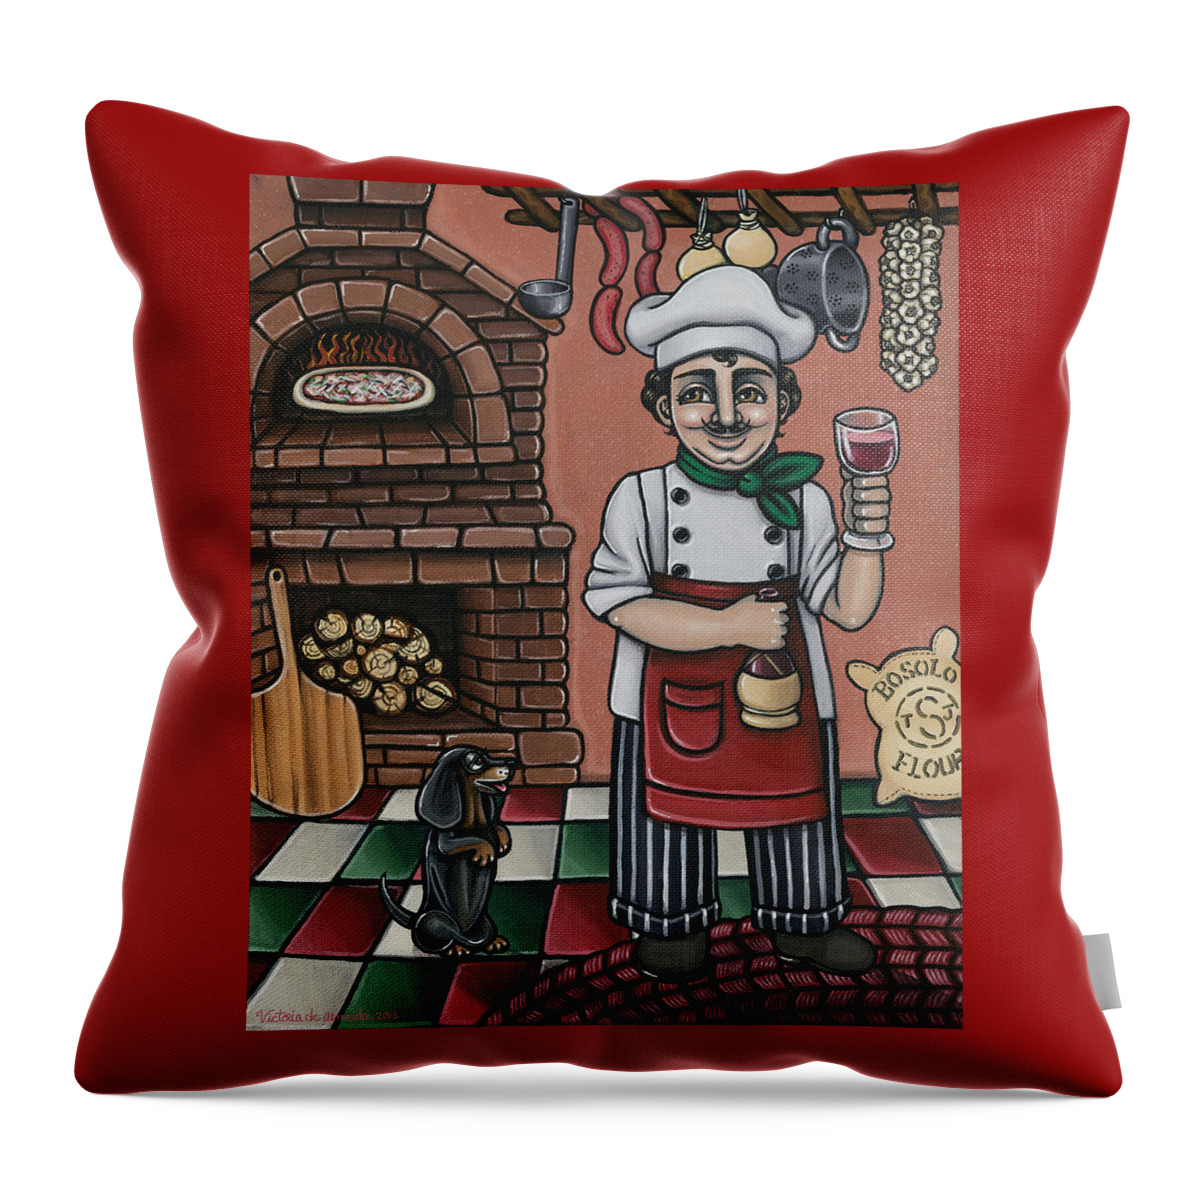 Italy Throw Pillow featuring the painting Tommys Italian Kitchen by Victoria De Almeida